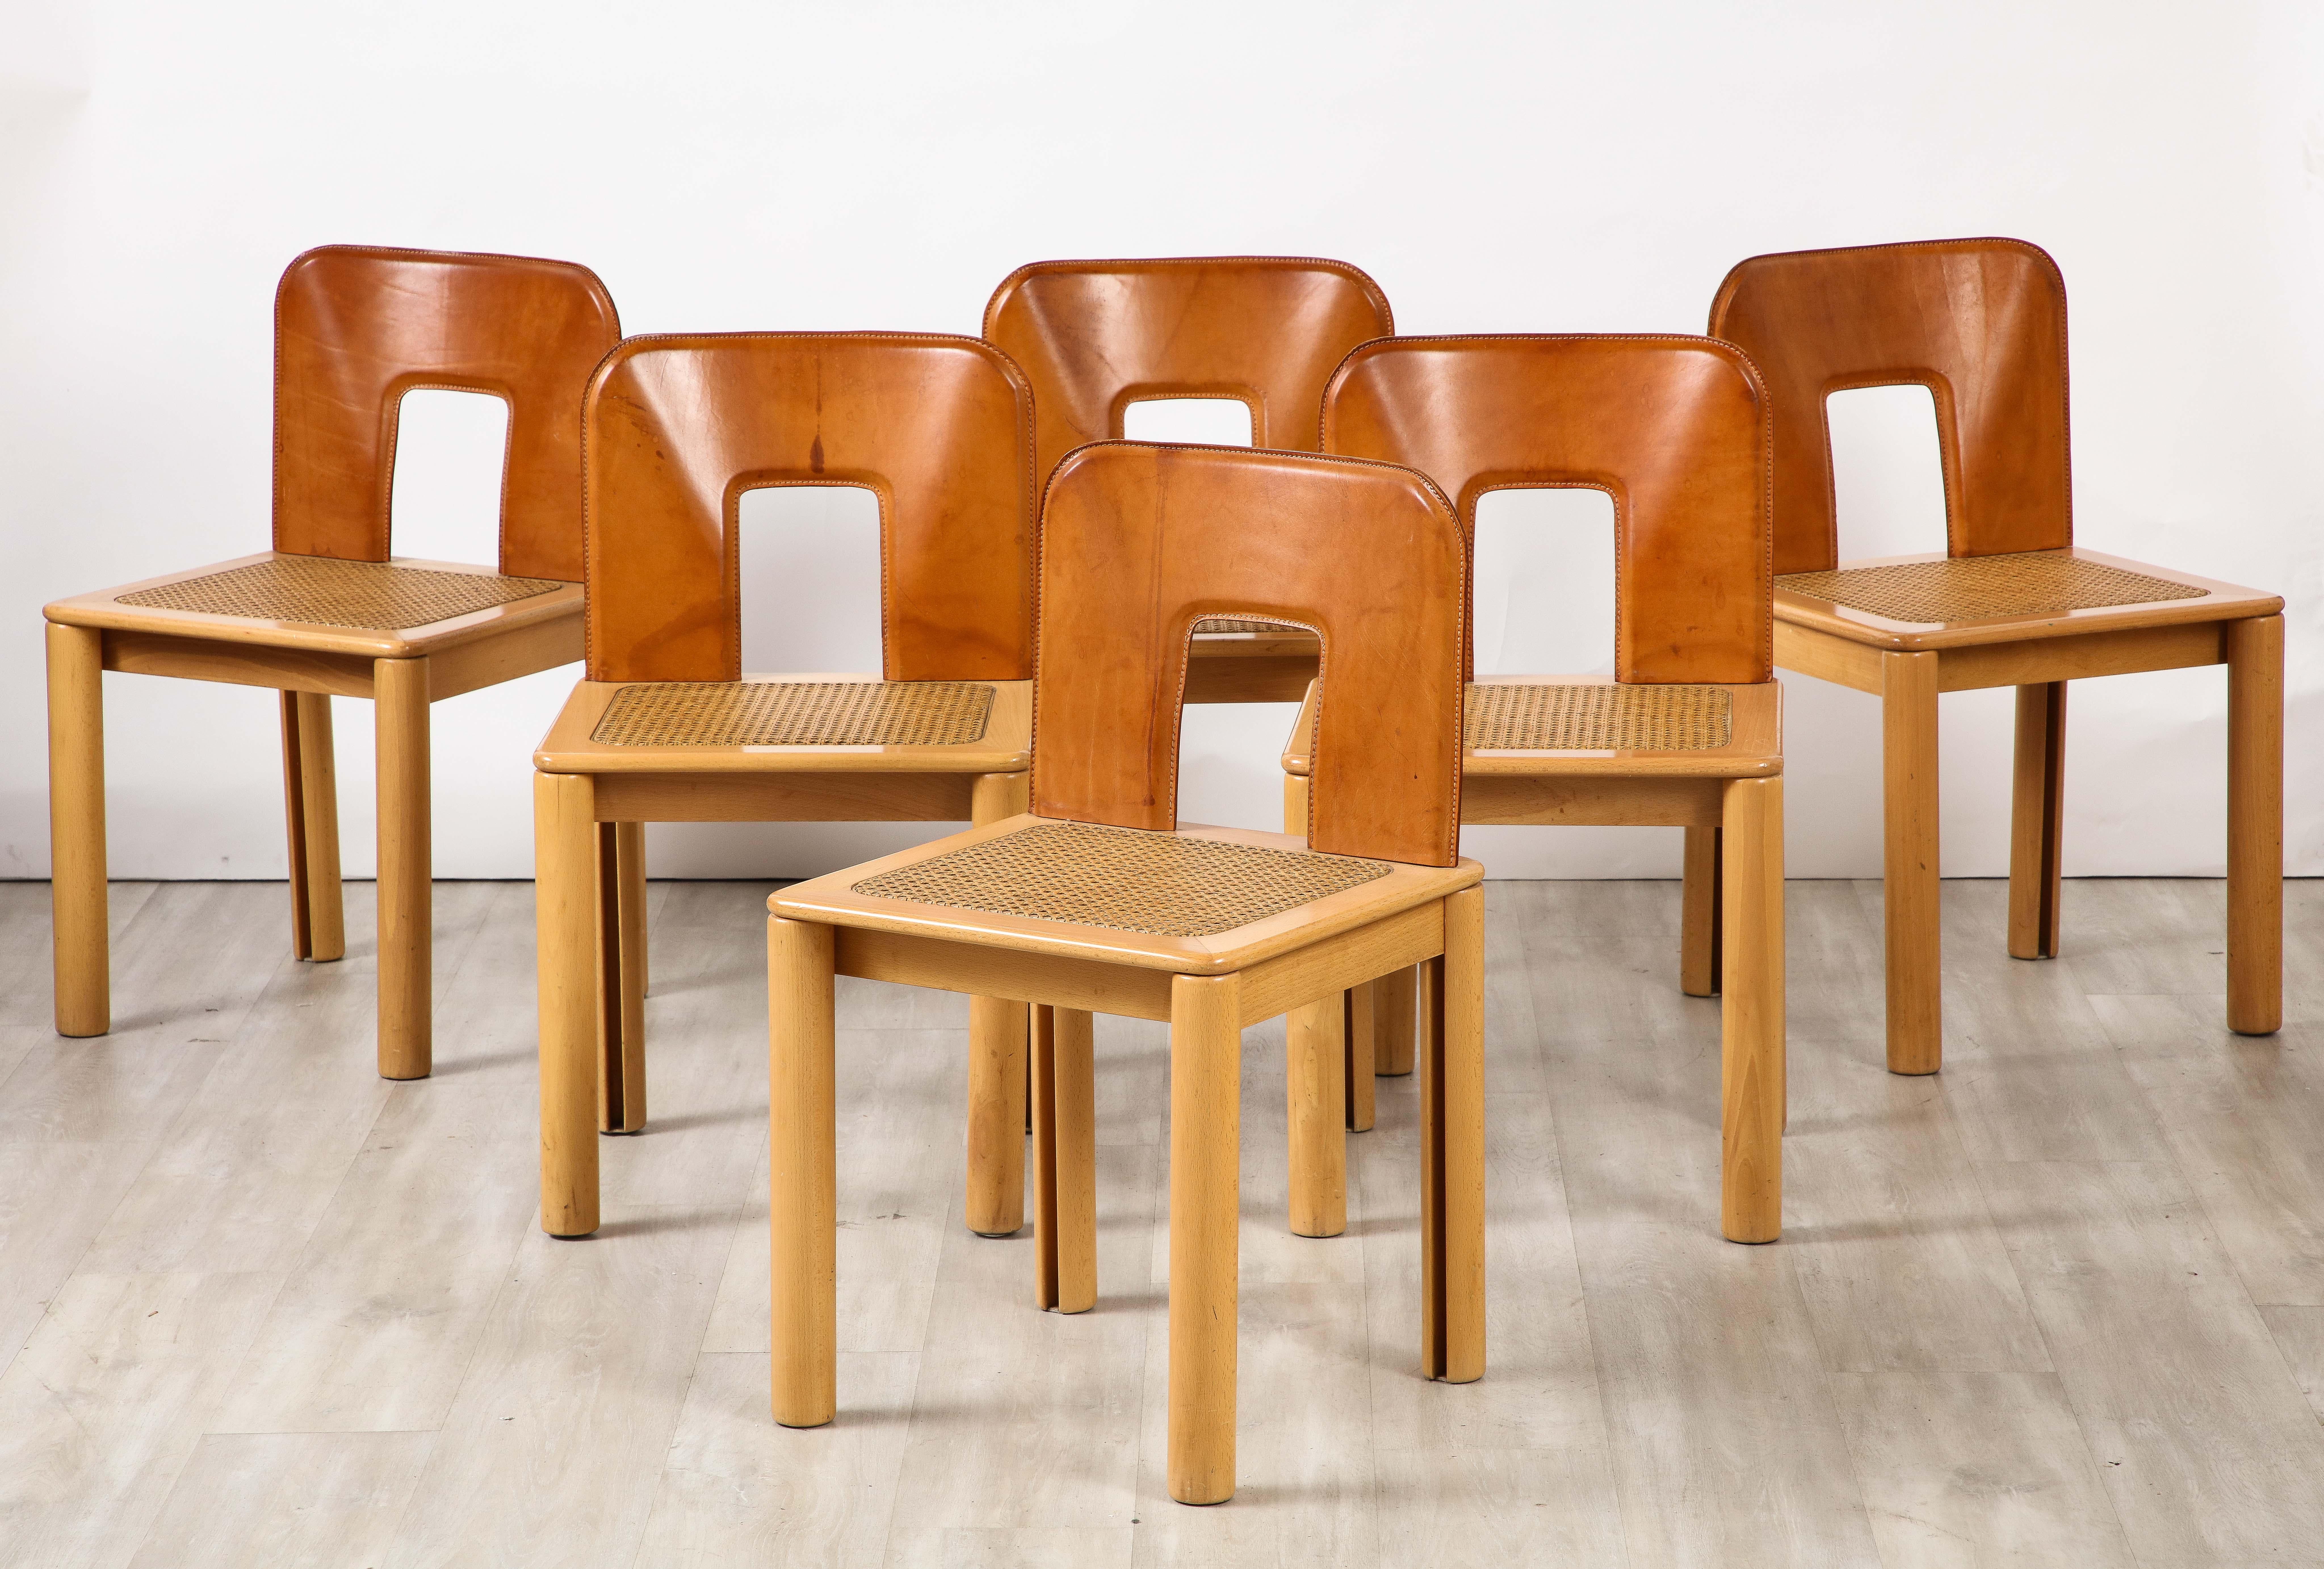 An Italian 1970's set of six side chairs or dining chairs with molded caramel leather back rests, caned seats and molded maple wood frames with rounded legs.  The combination of these three organic and textured materials create a charming and chic